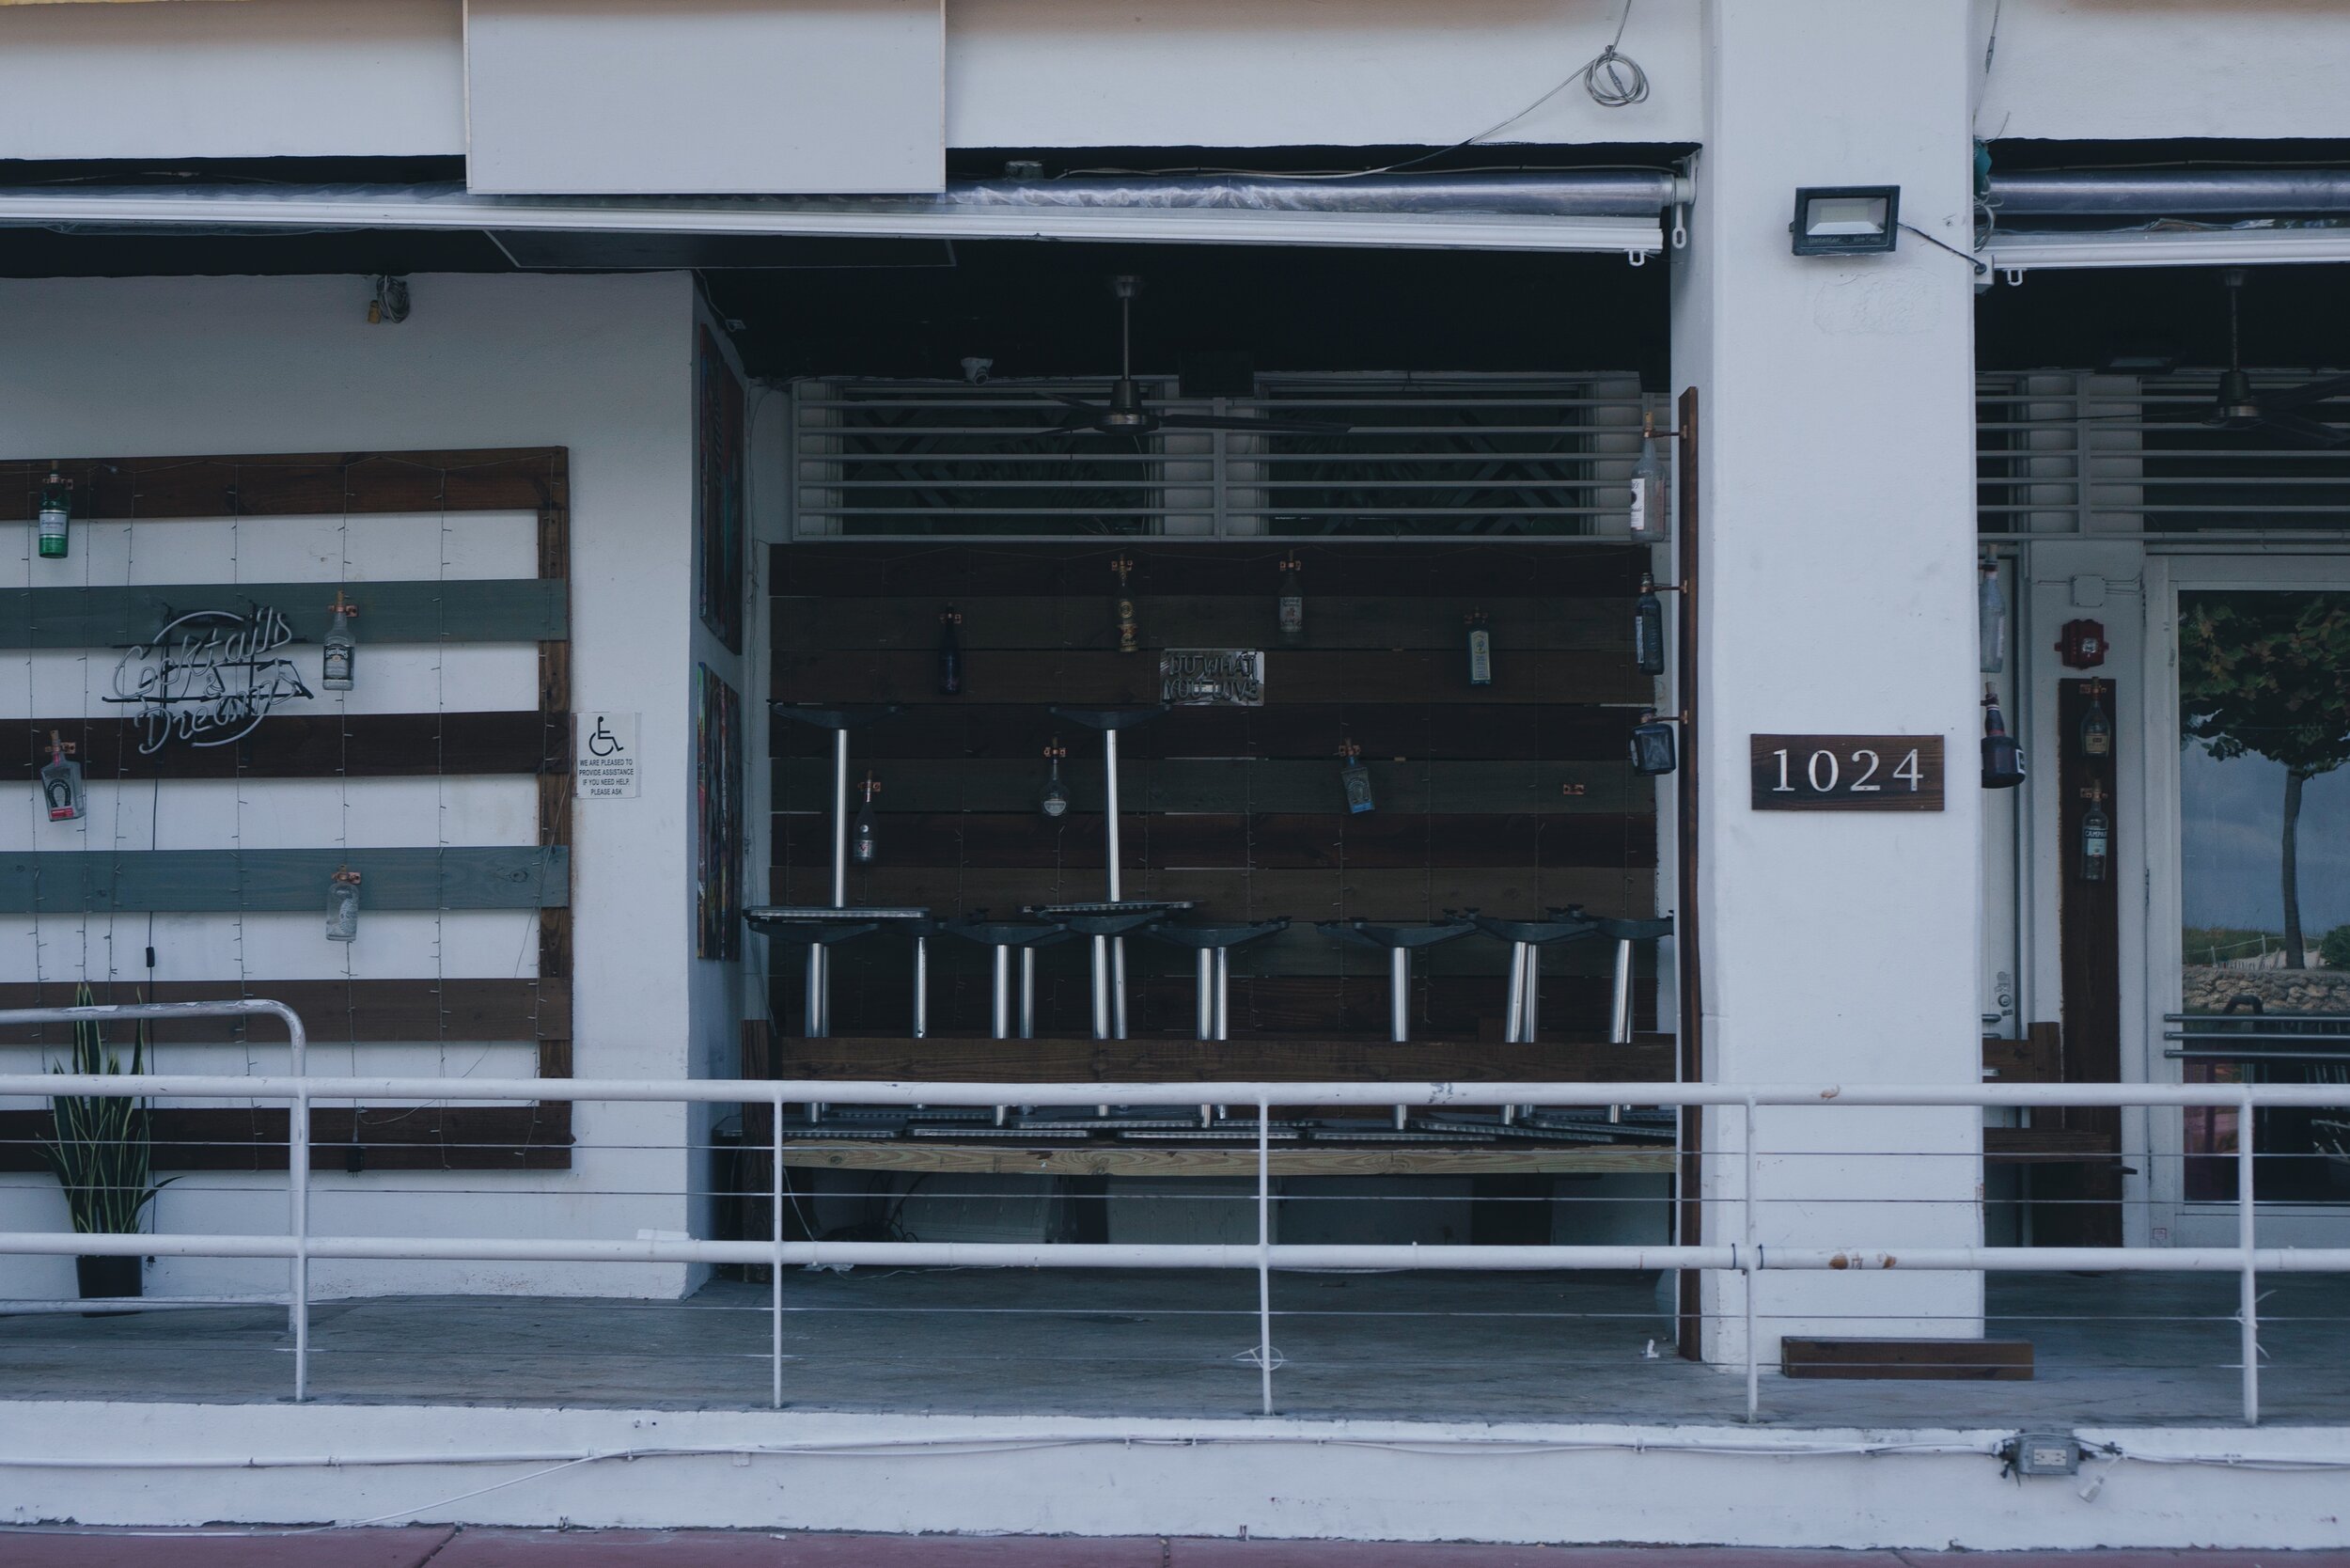 Restaurants closed on Ocean Drive. March 22, 2020